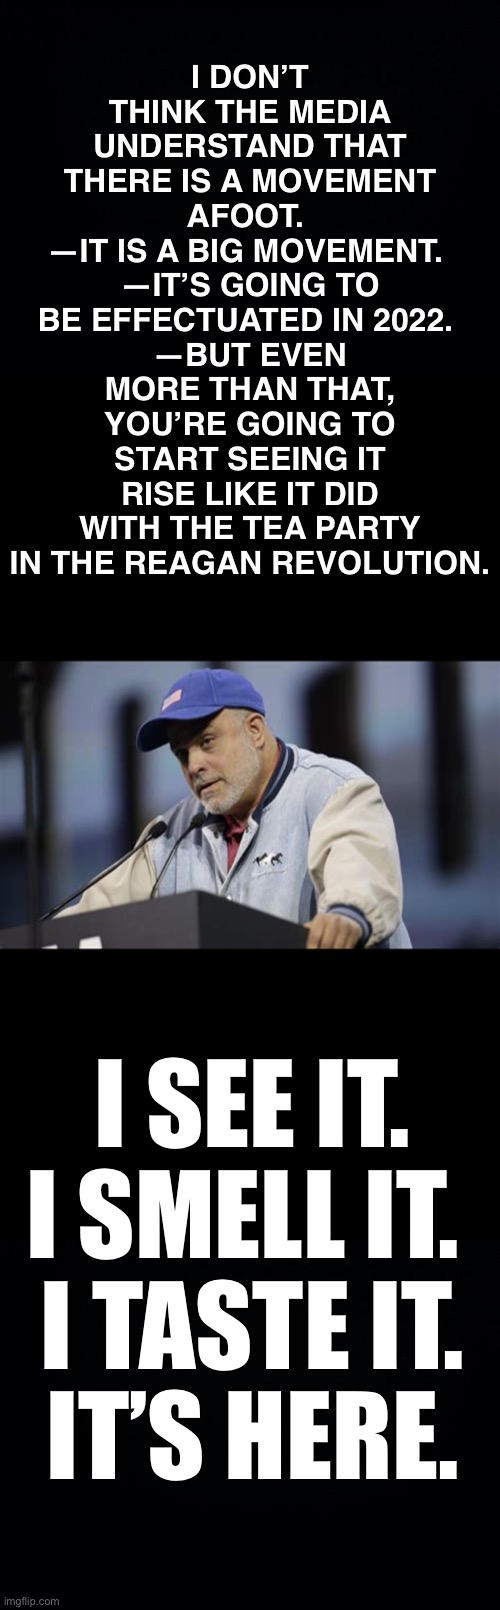 Mark Levin | I DON’T THINK THE MEDIA UNDERSTAND THAT THERE IS A MOVEMENT AFOOT. 
—IT IS A BIG MOVEMENT. 
—IT’S GOING TO BE EFFECTUATED IN 2022. 
—BUT EVEN MORE THAN THAT, YOU’RE GOING TO START SEEING IT RISE LIKE IT DID WITH THE TEA PARTY IN THE REAGAN REVOLUTION. I SEE IT. I SMELL IT. 
I TASTE IT.
IT’S HERE. | image tagged in mark levin,ConservativesOnly | made w/ Imgflip meme maker